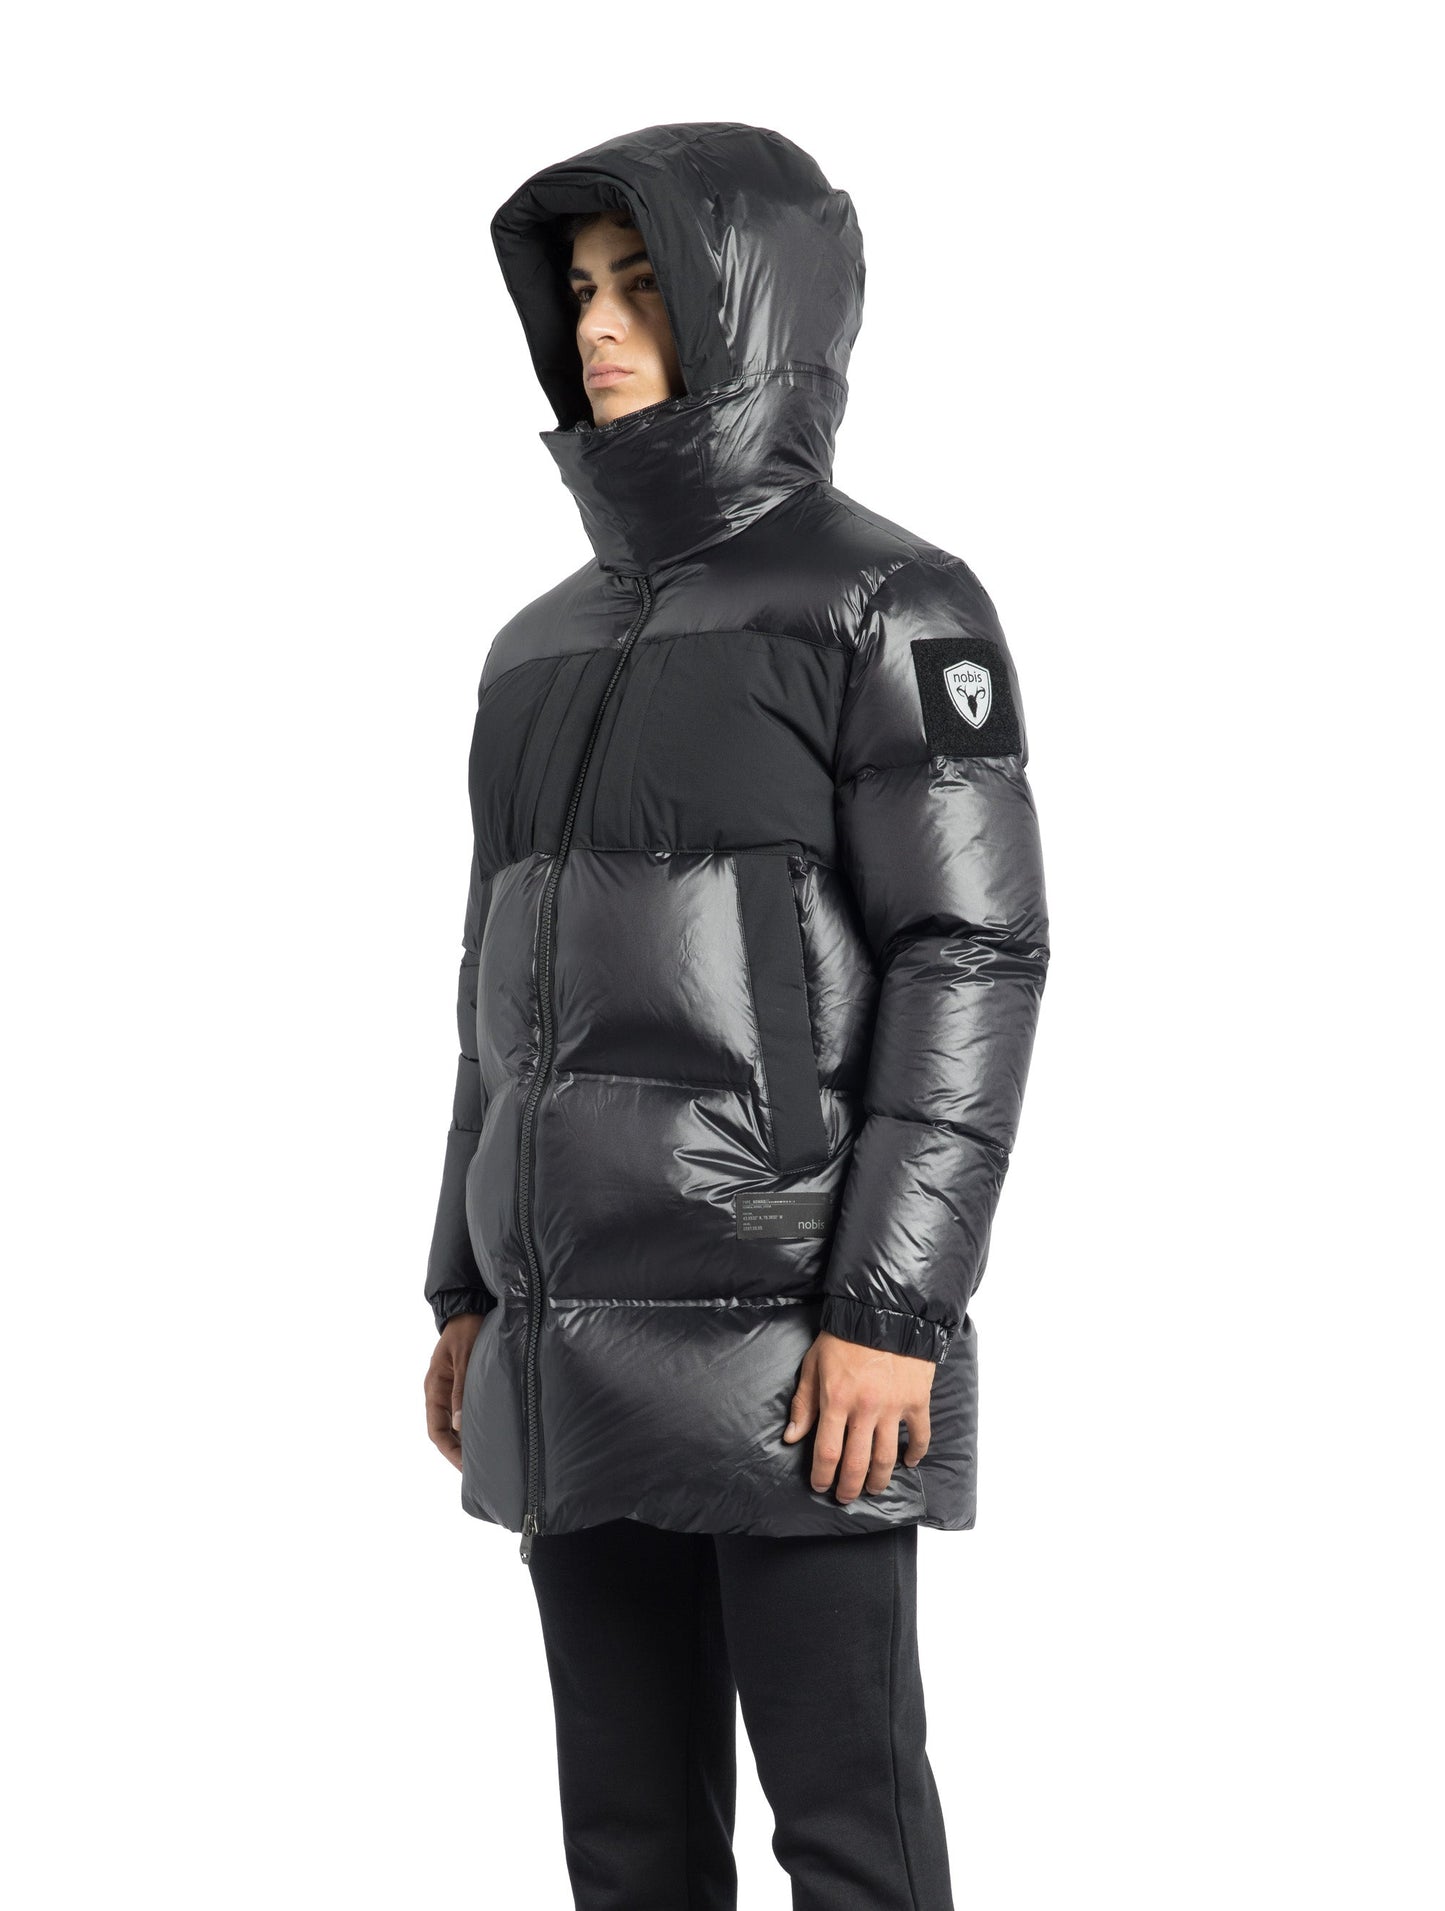 Neelix Men's Long Puffer Jacket in thigh length, premium cire technical nylon taffeta and stretch ripstop fabrication, Premium Canadian origin White Duck Down insulation, non-removable down-filled hood, two-way centre-front zipper, pit zipper vents, hidden chest zipper pockets, fleece-lined magnetic closure waist pockets, in Black